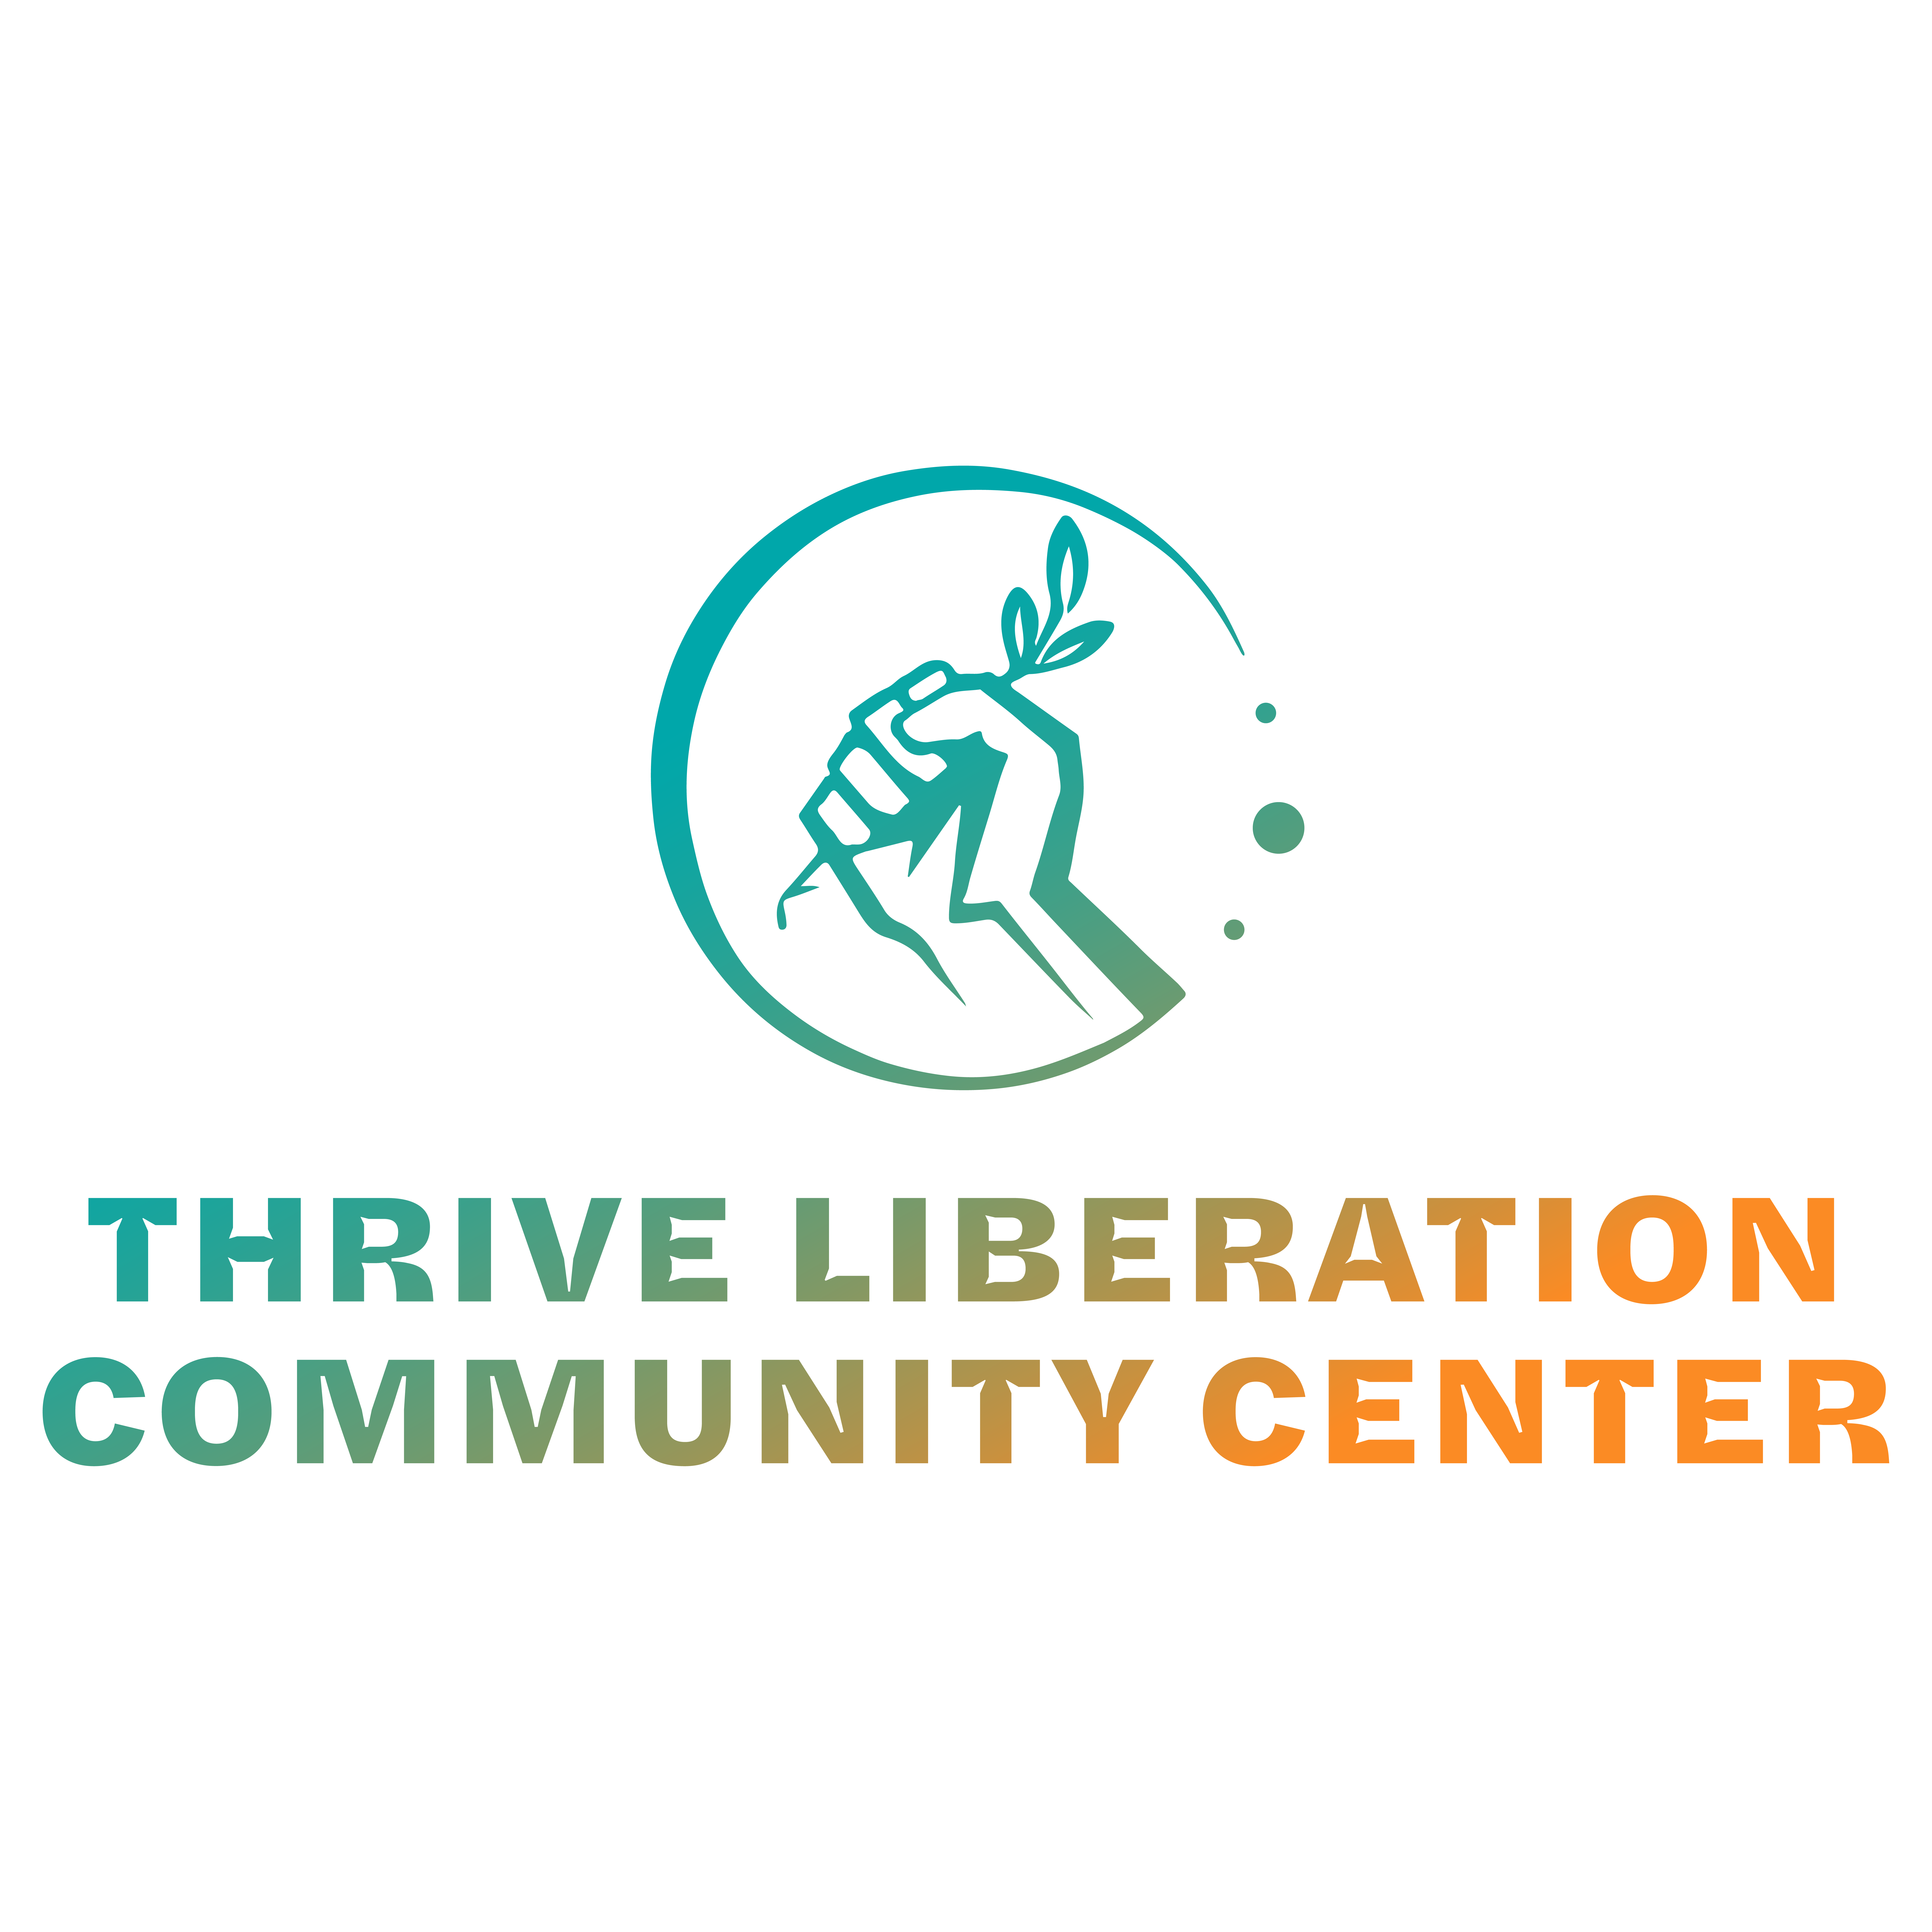 Thrive Orange and Teal stacked logo